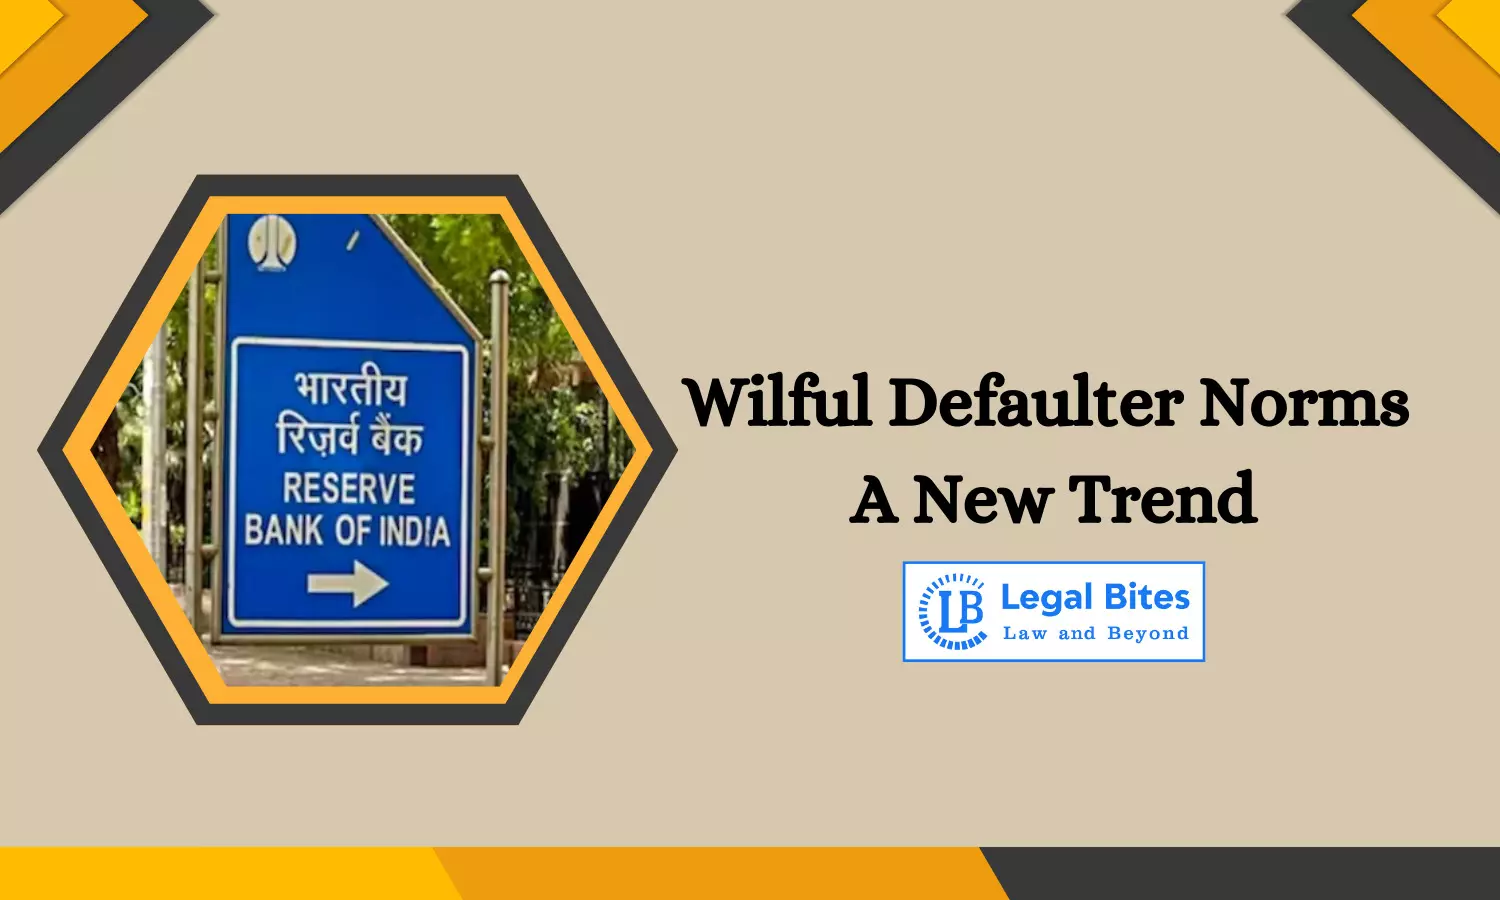 Wilful Defaulter Norms - A New Trend